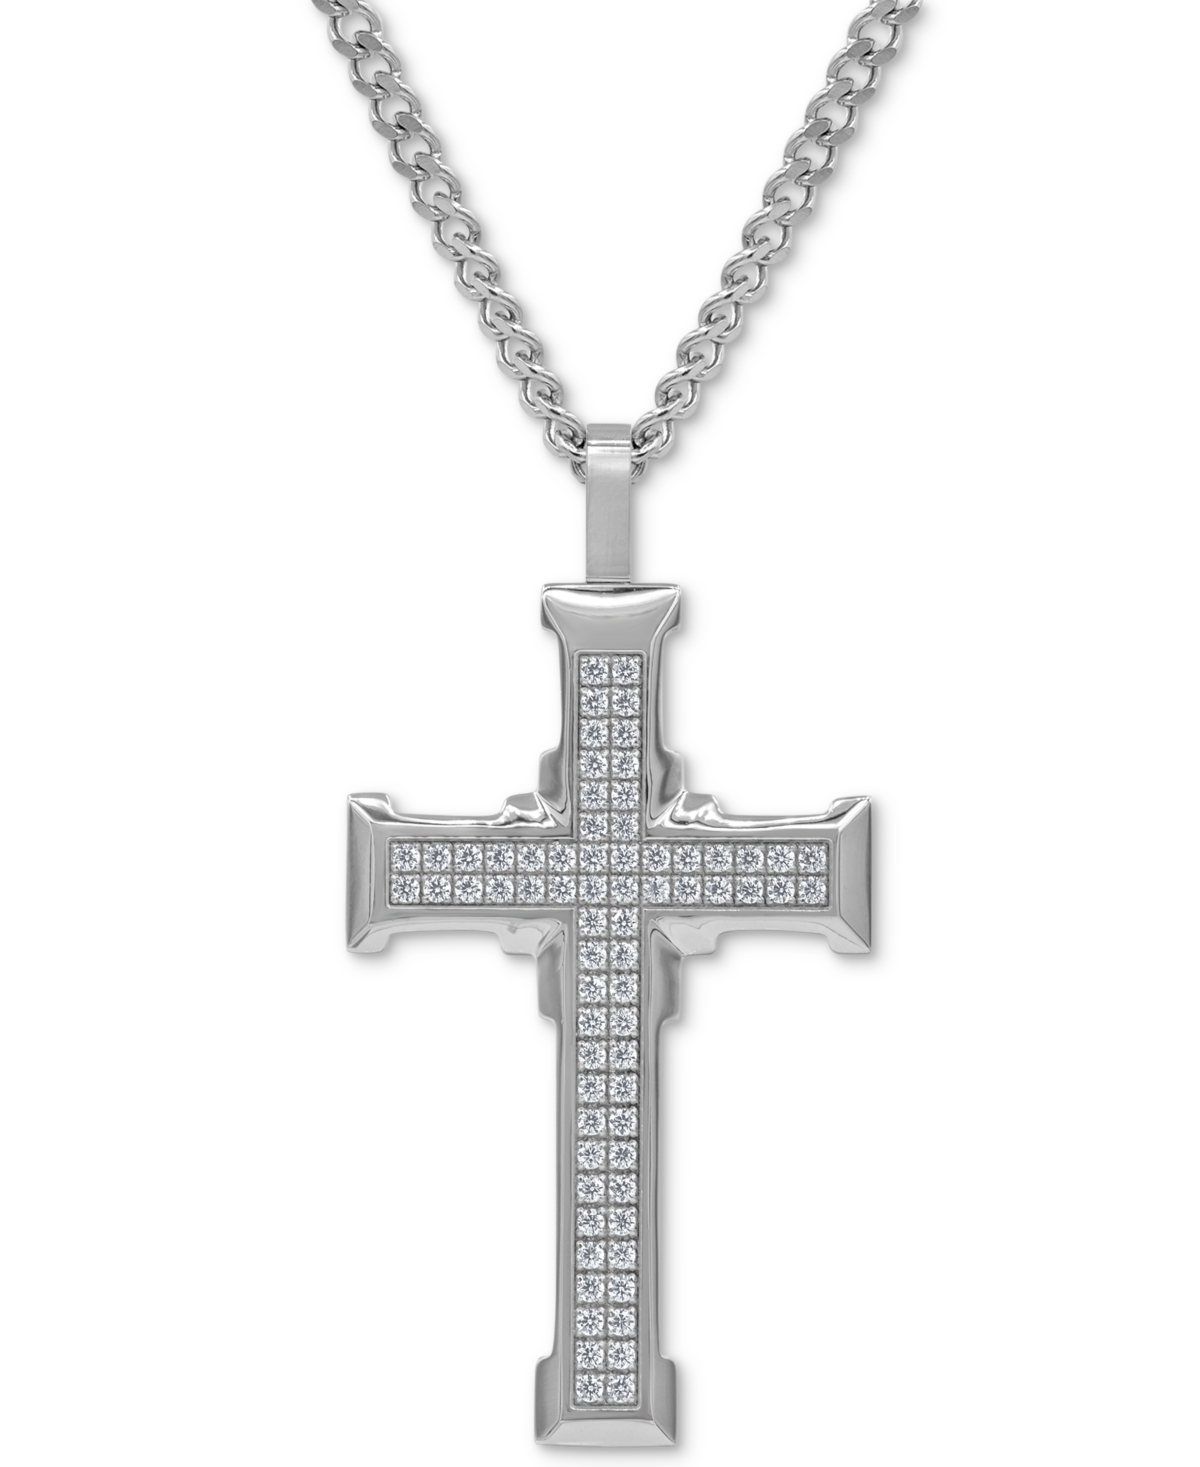 Men's Cubic Zirconia Large Cross 24" Pendant Necklace in Stainless Steel - Stainless Steel